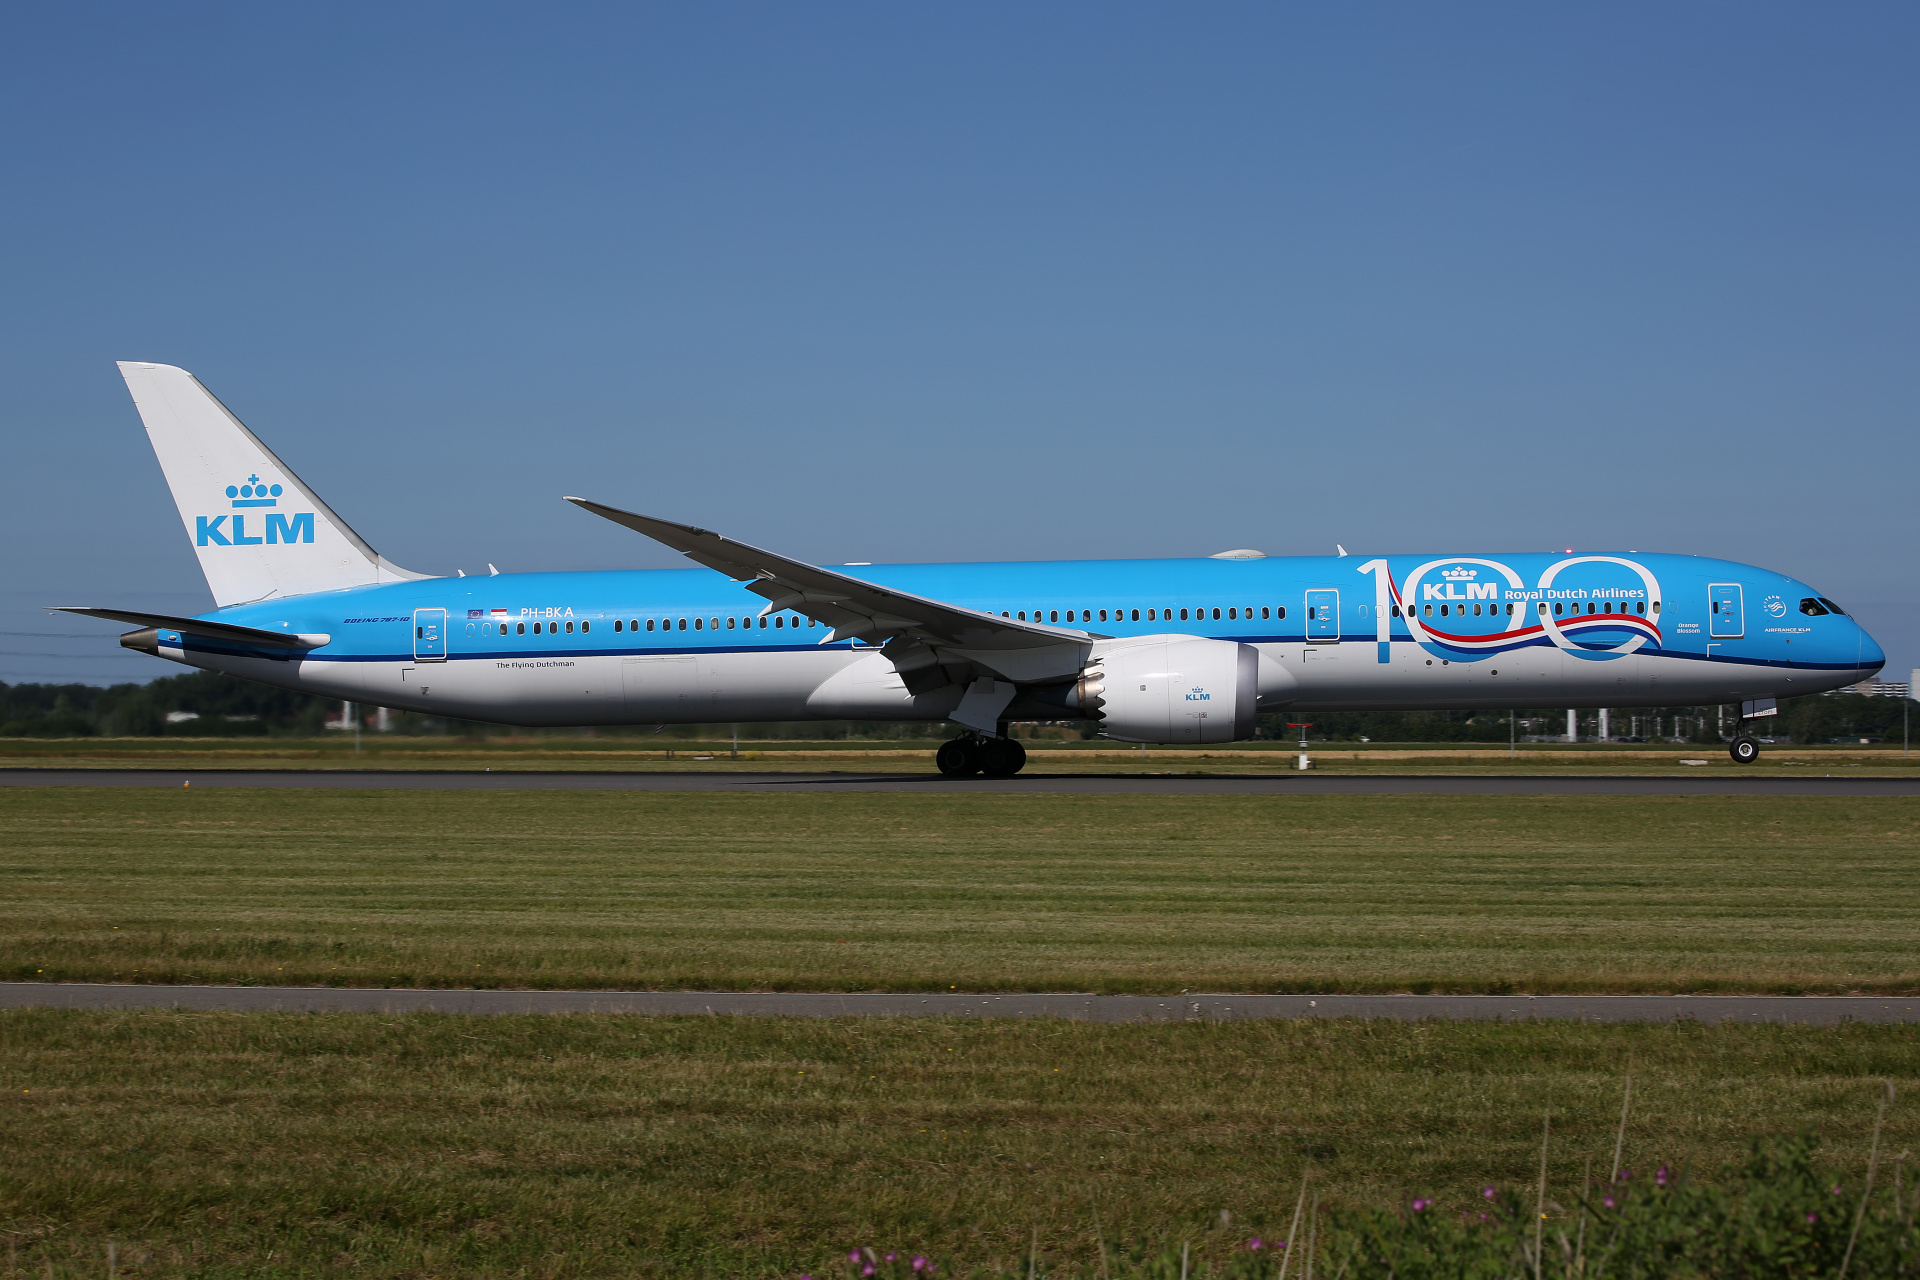 PH-BKA, KLM Royal Dutch Airlines (100 years livery) (Aircraft » Schiphol Spotting » Boeing 787-10 Dreamliner)